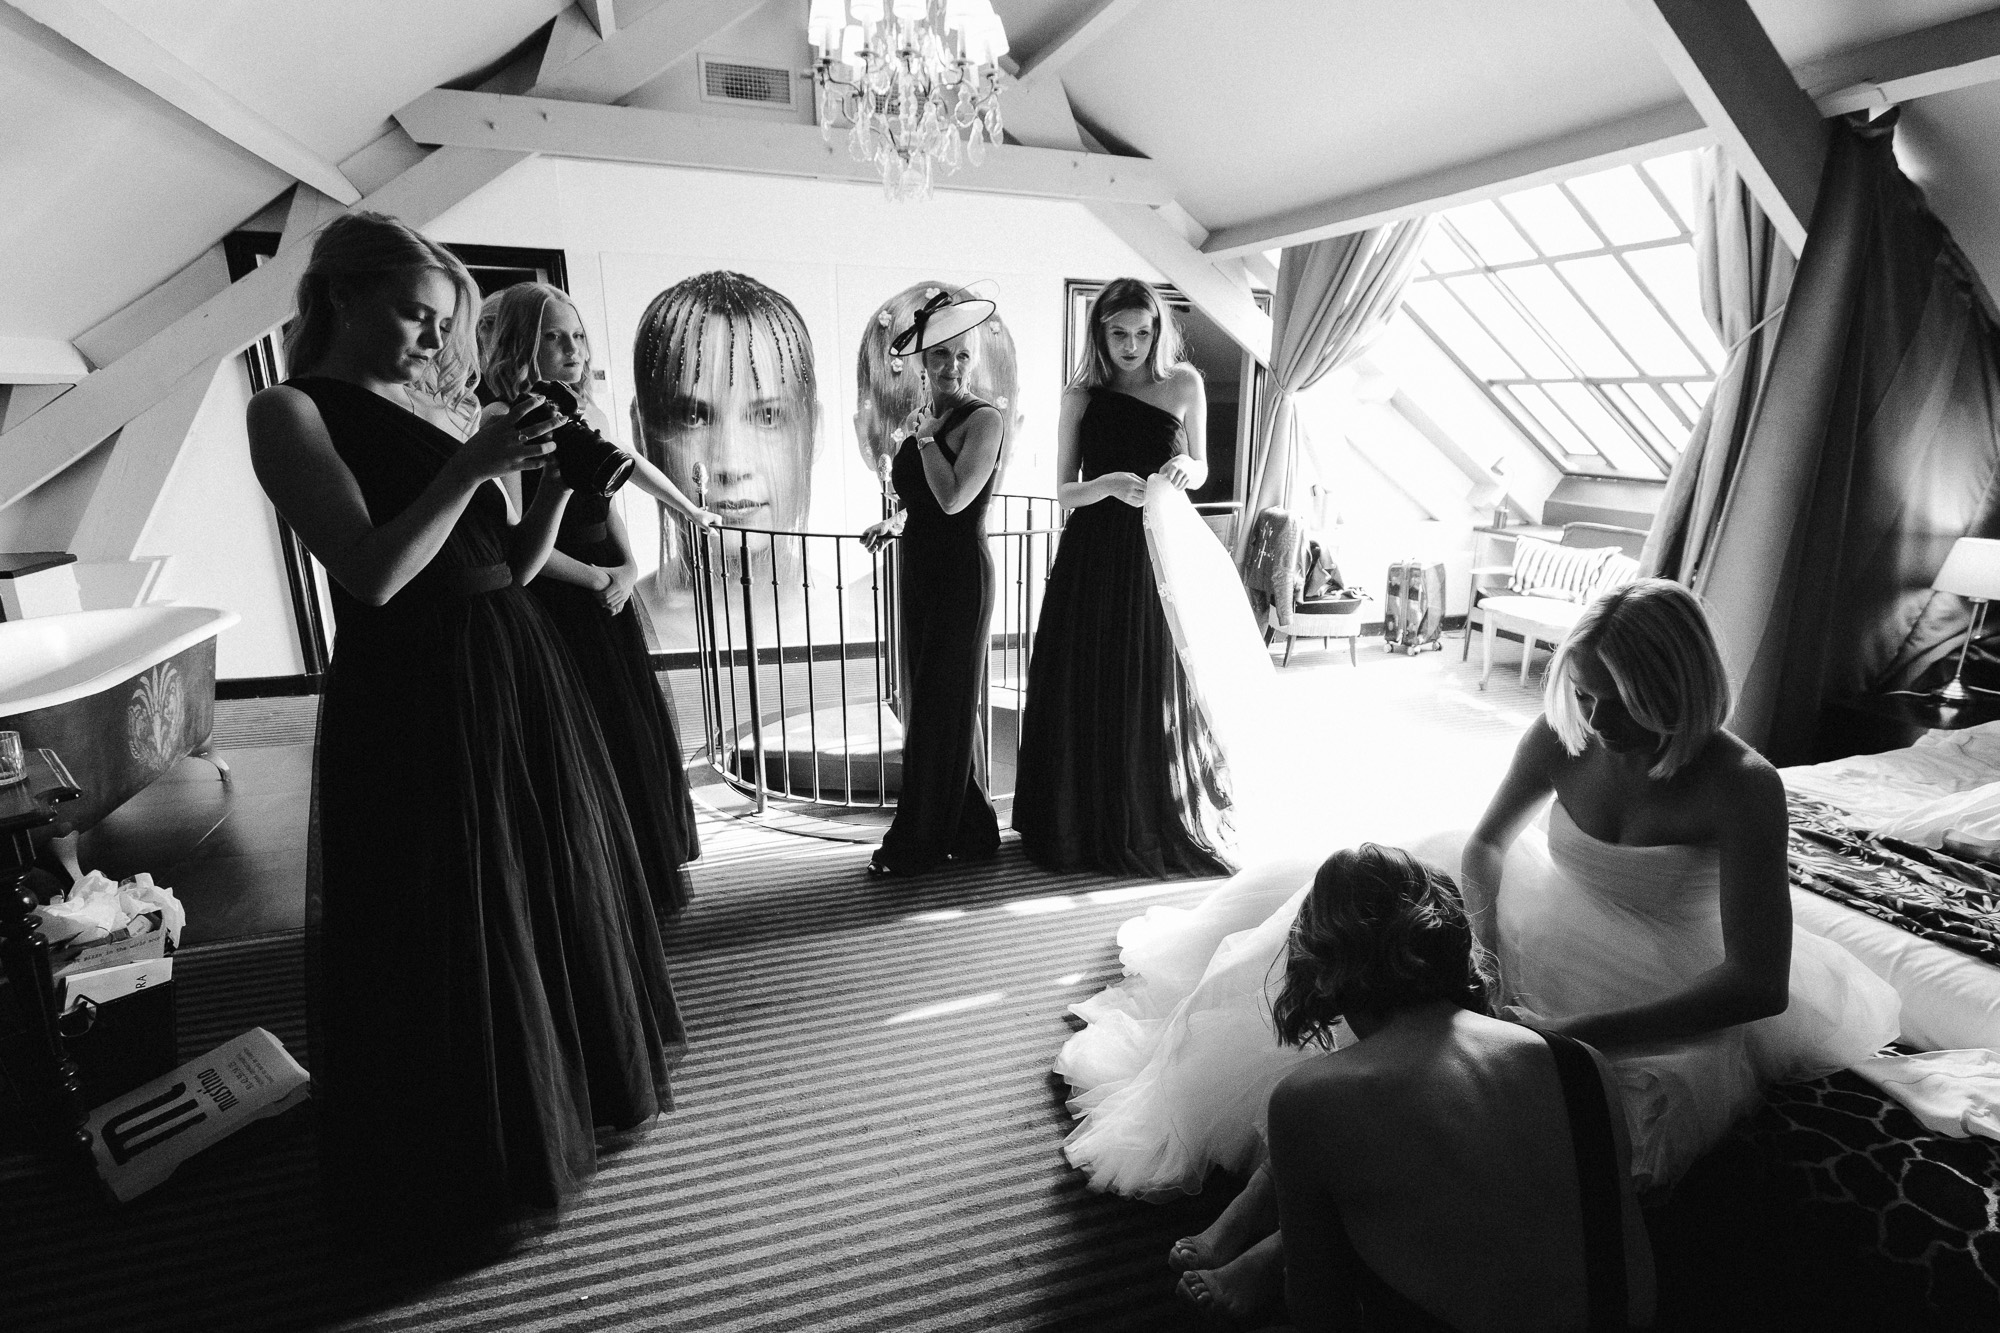 Paris wedding photographer: the bride is being helped into her lovely suzanne neville dress by her mum and bridesmaids